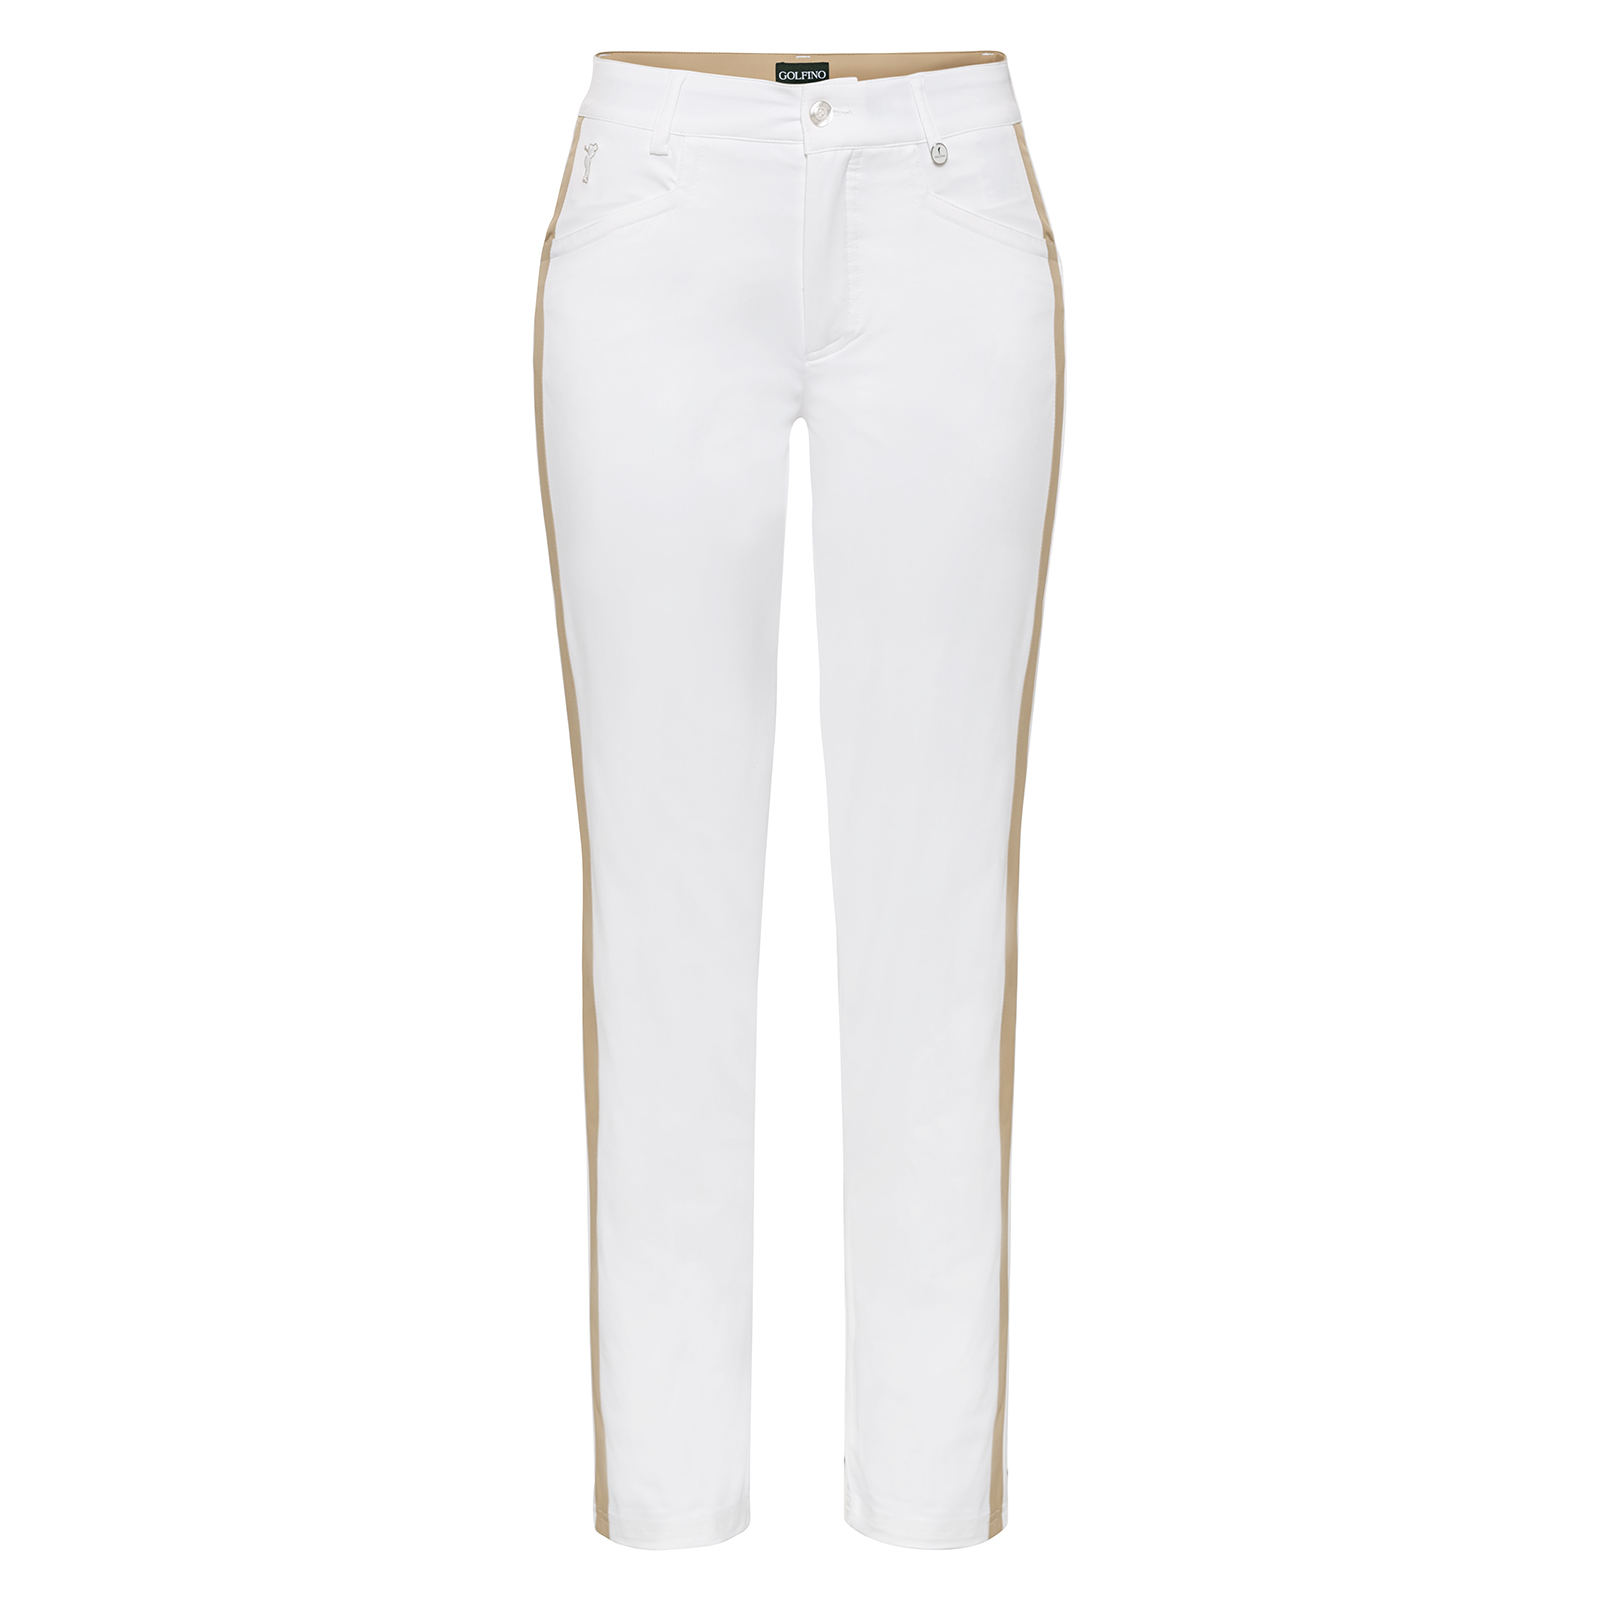 Ladies’ Techno Stretch 7/8 golf trousers with sun protection 